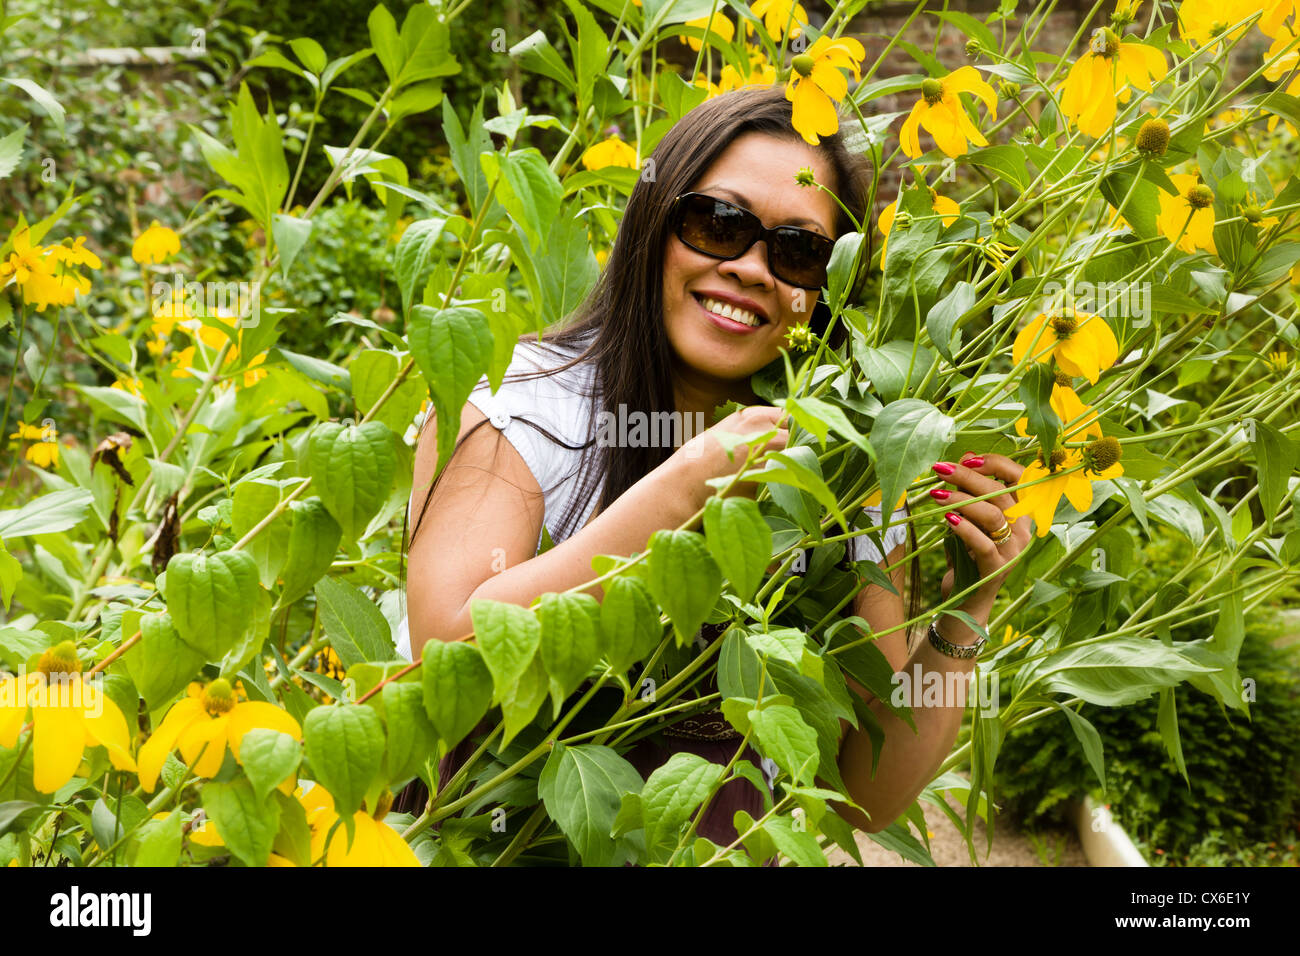 Woman Filipina Sunglasses High Resolution Stock Photography and Images -  Alamy